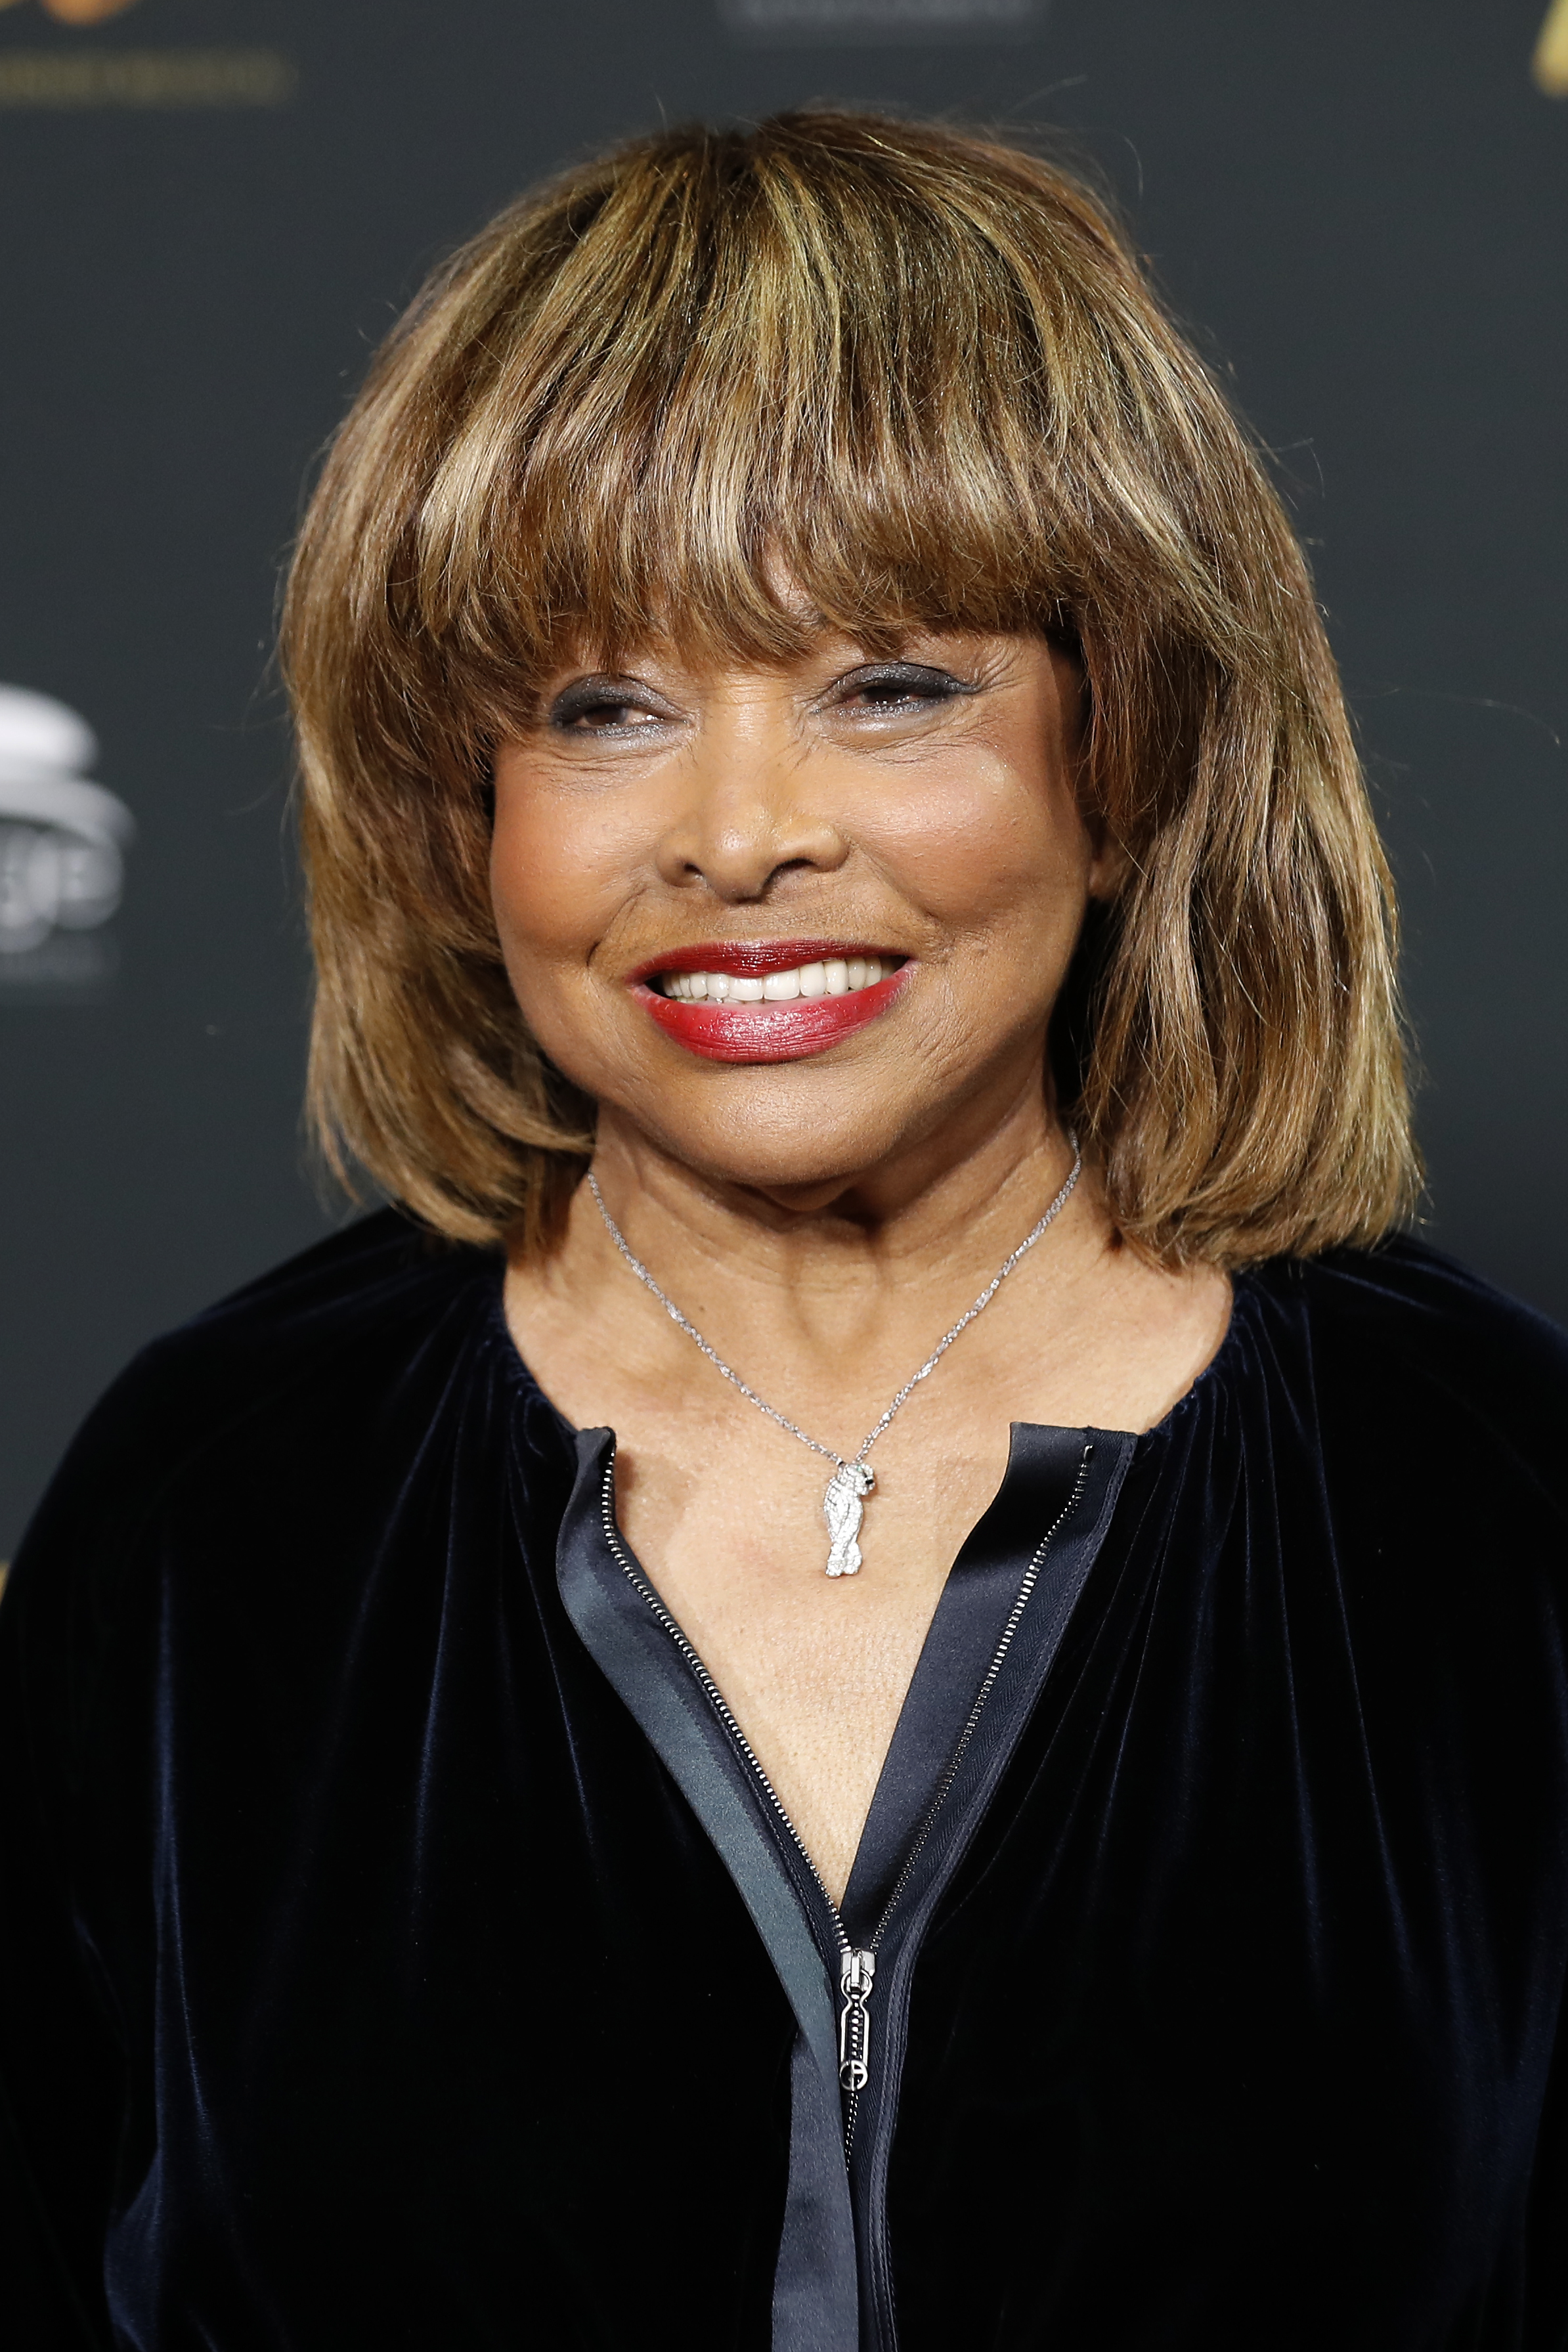 Tina Turner in Hamburg, German in 2018 | Source: Getty Images